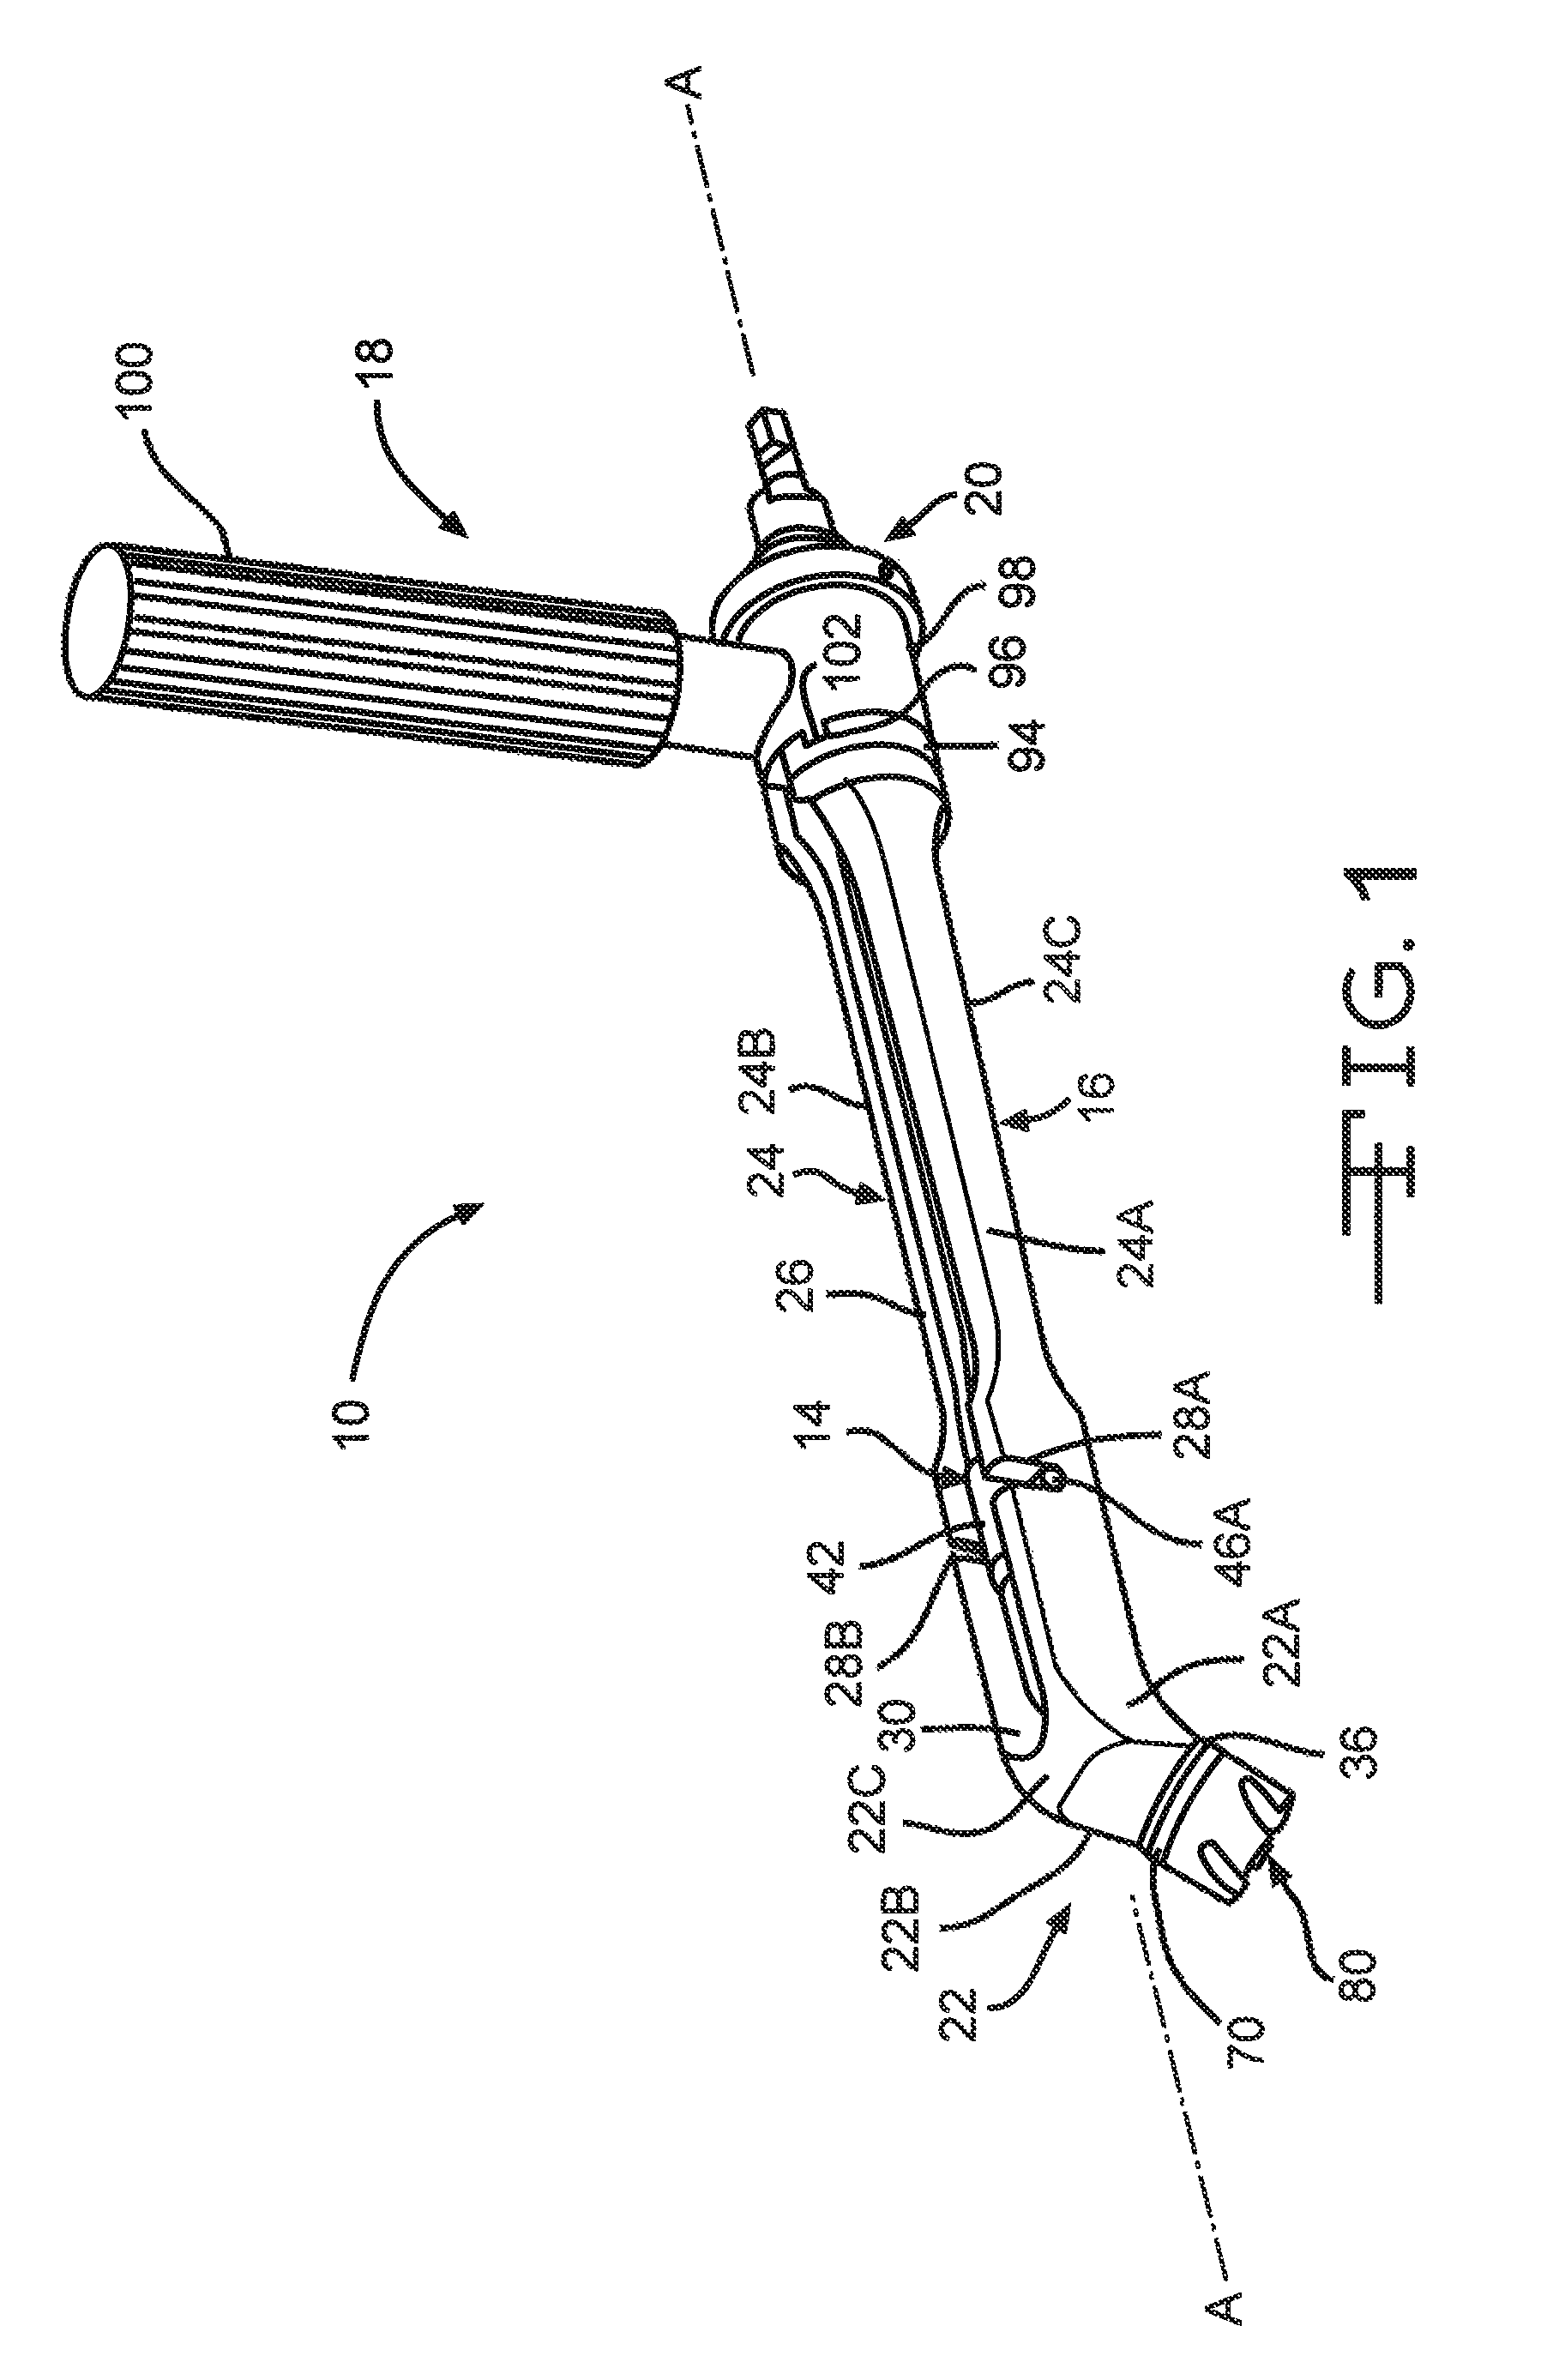 Angled reamer spindle for minimally invasive hip replacement surgery